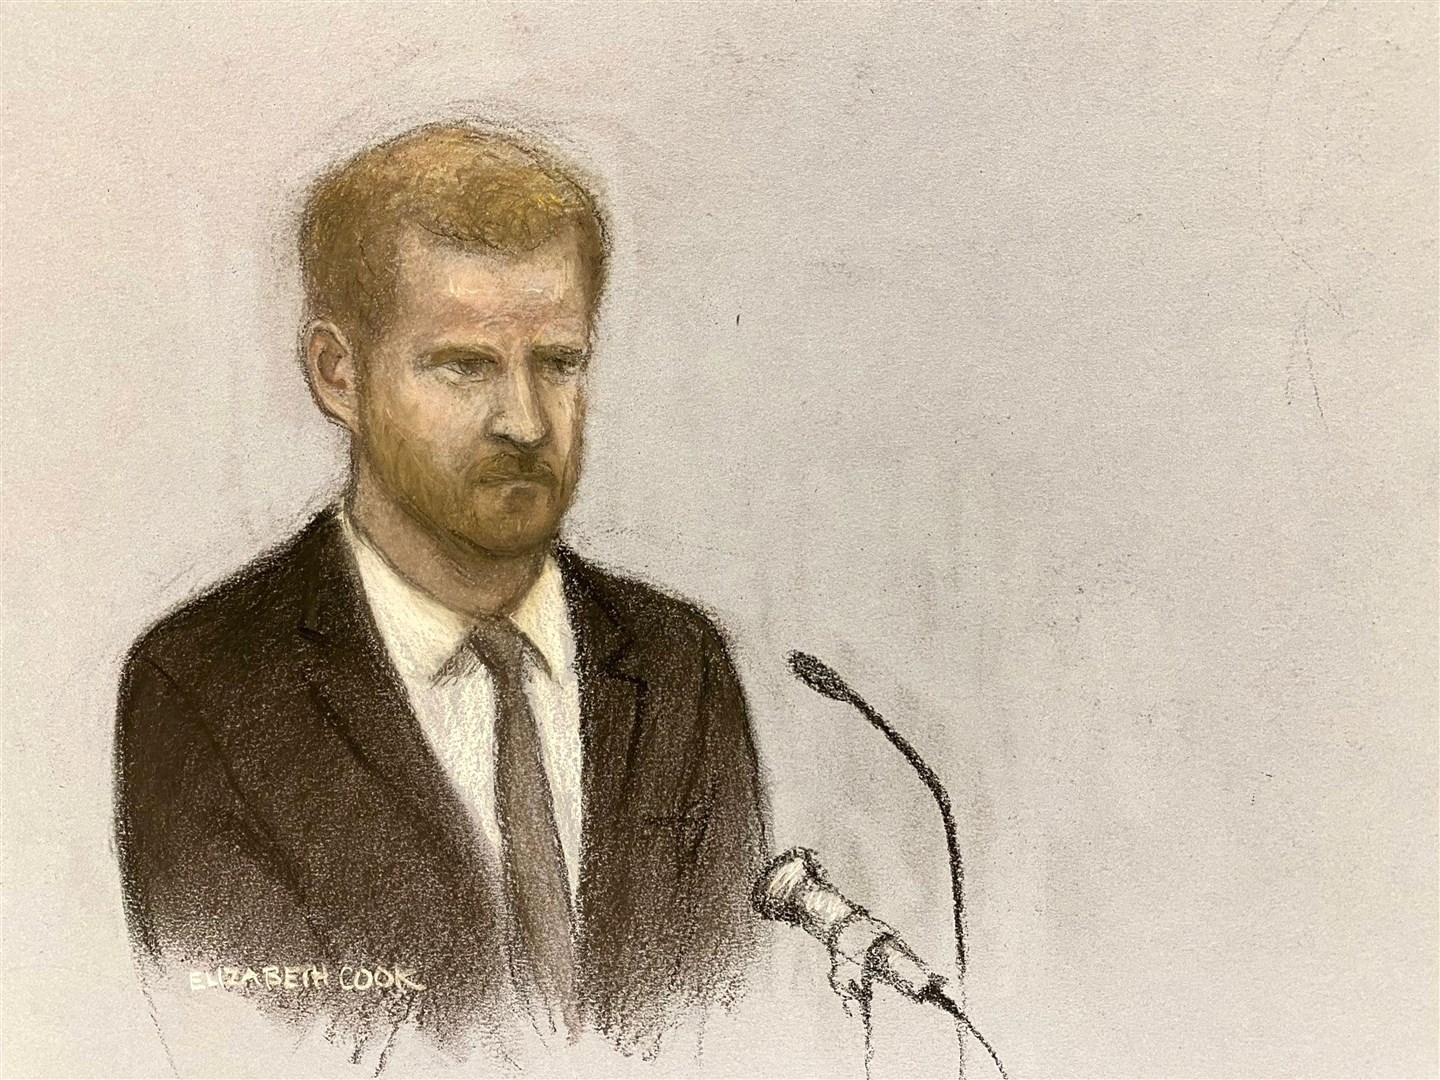 The Duke of Sussex giving evidence at the Rolls Buildings in central London during the phone hacking trial against Mirror Group Newspapers (MGN) (Elizabeth Cook/PA)